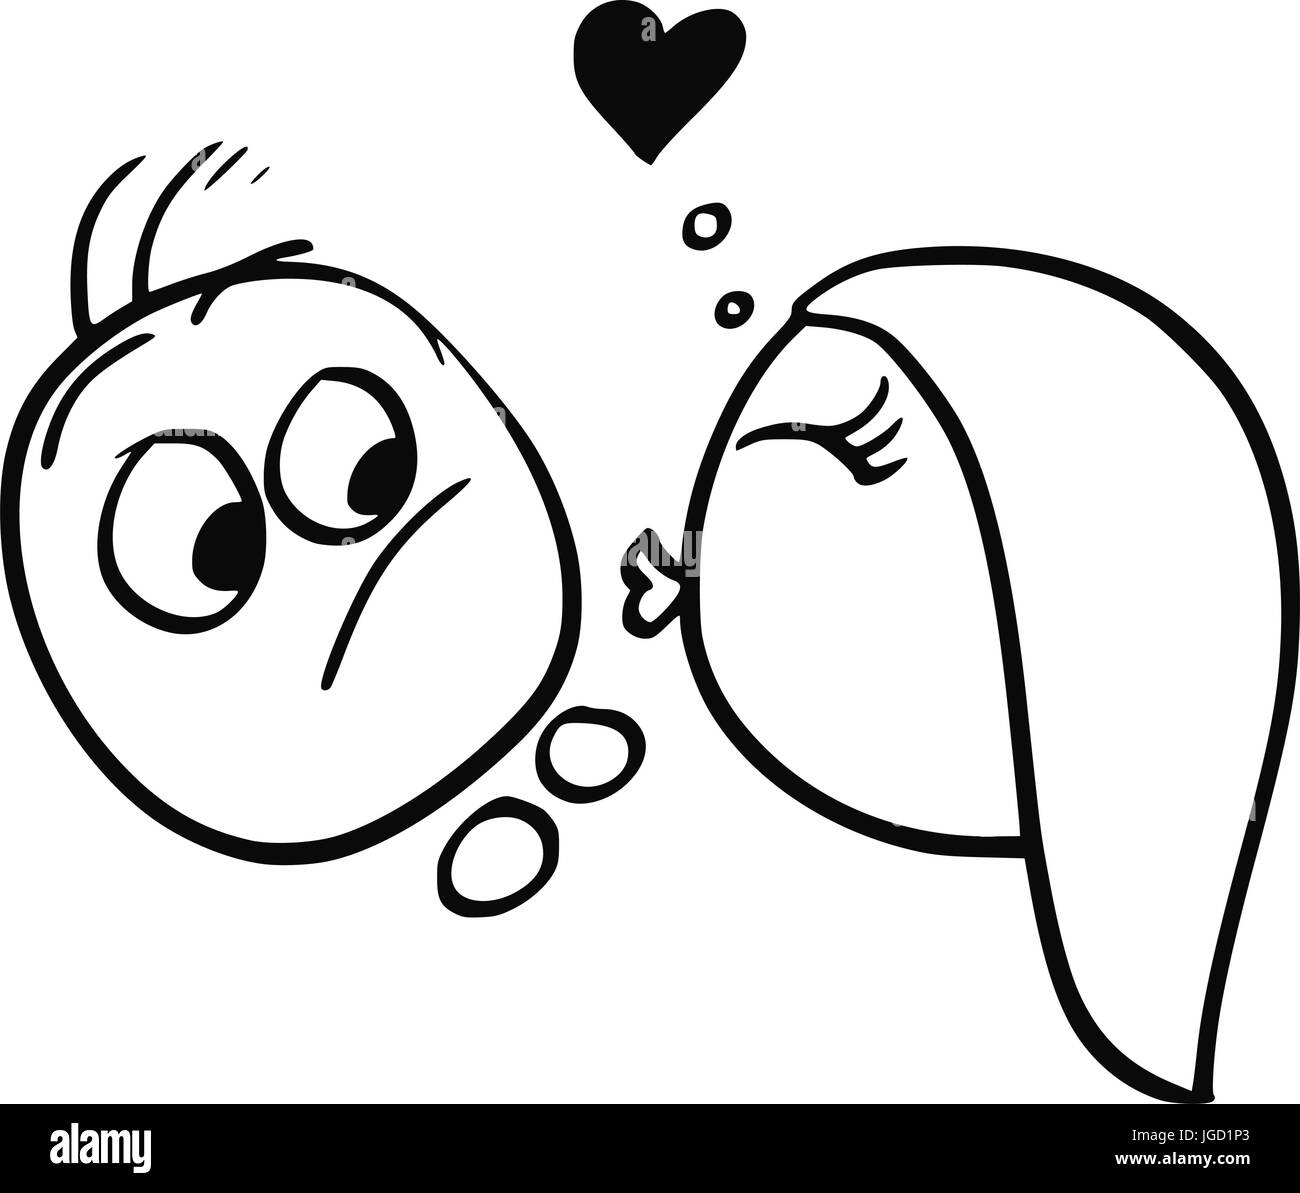 Cartoon vector of  man resisting the kiss from woman in love with heart symbol above Stock Vector